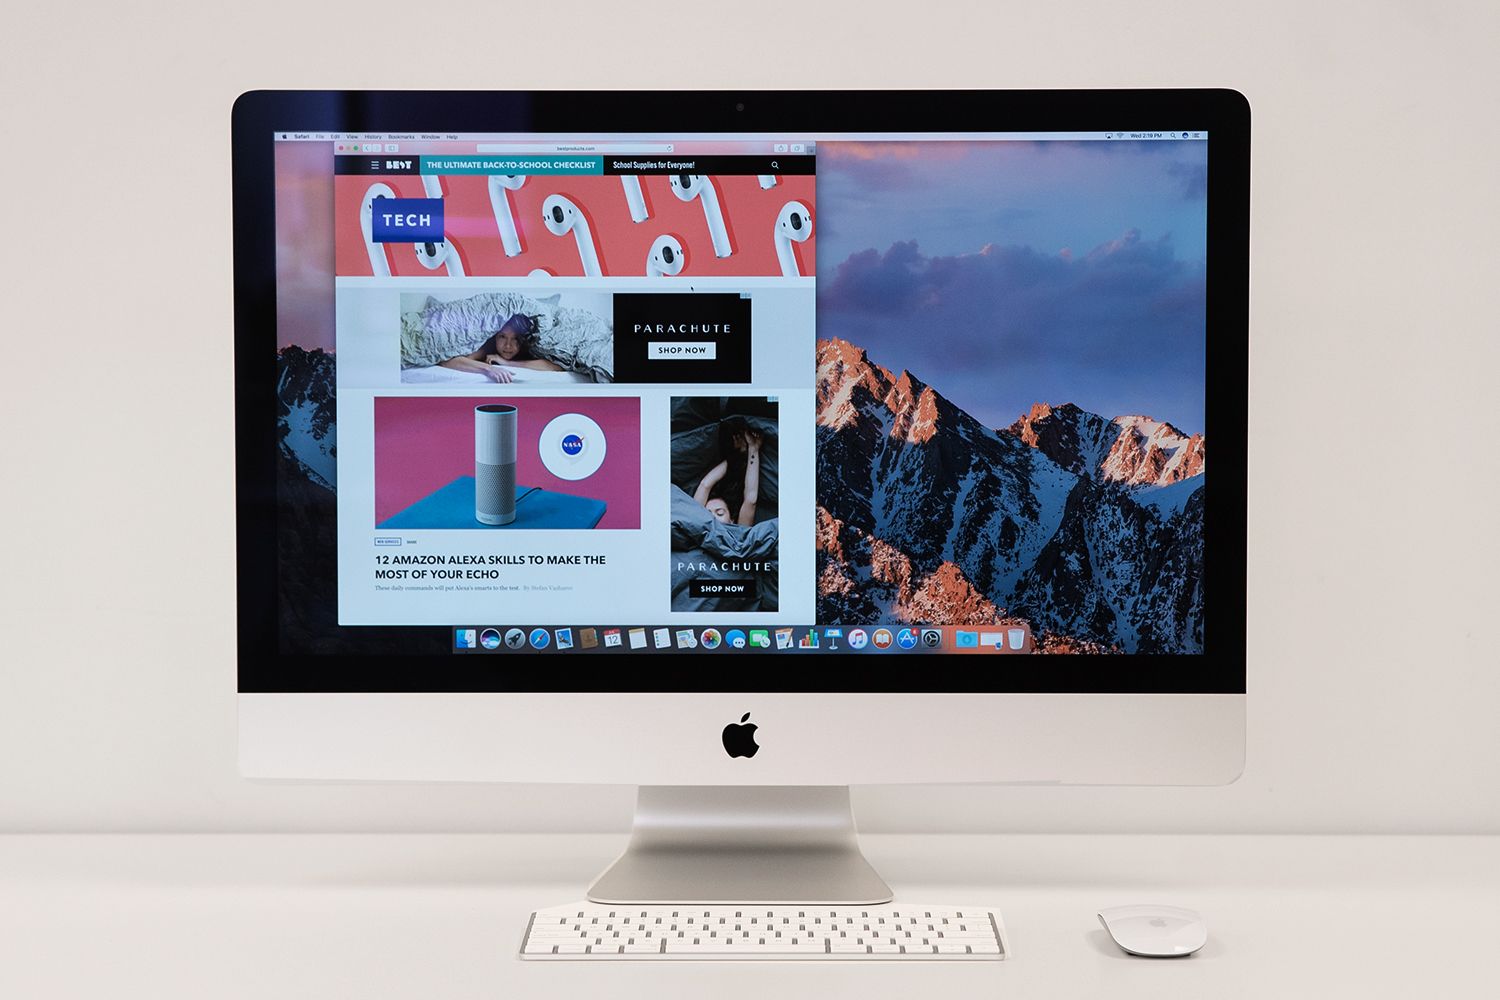 iMac 27-Inch With 5K Retina Review 2018 - Rating Apple's New iMac